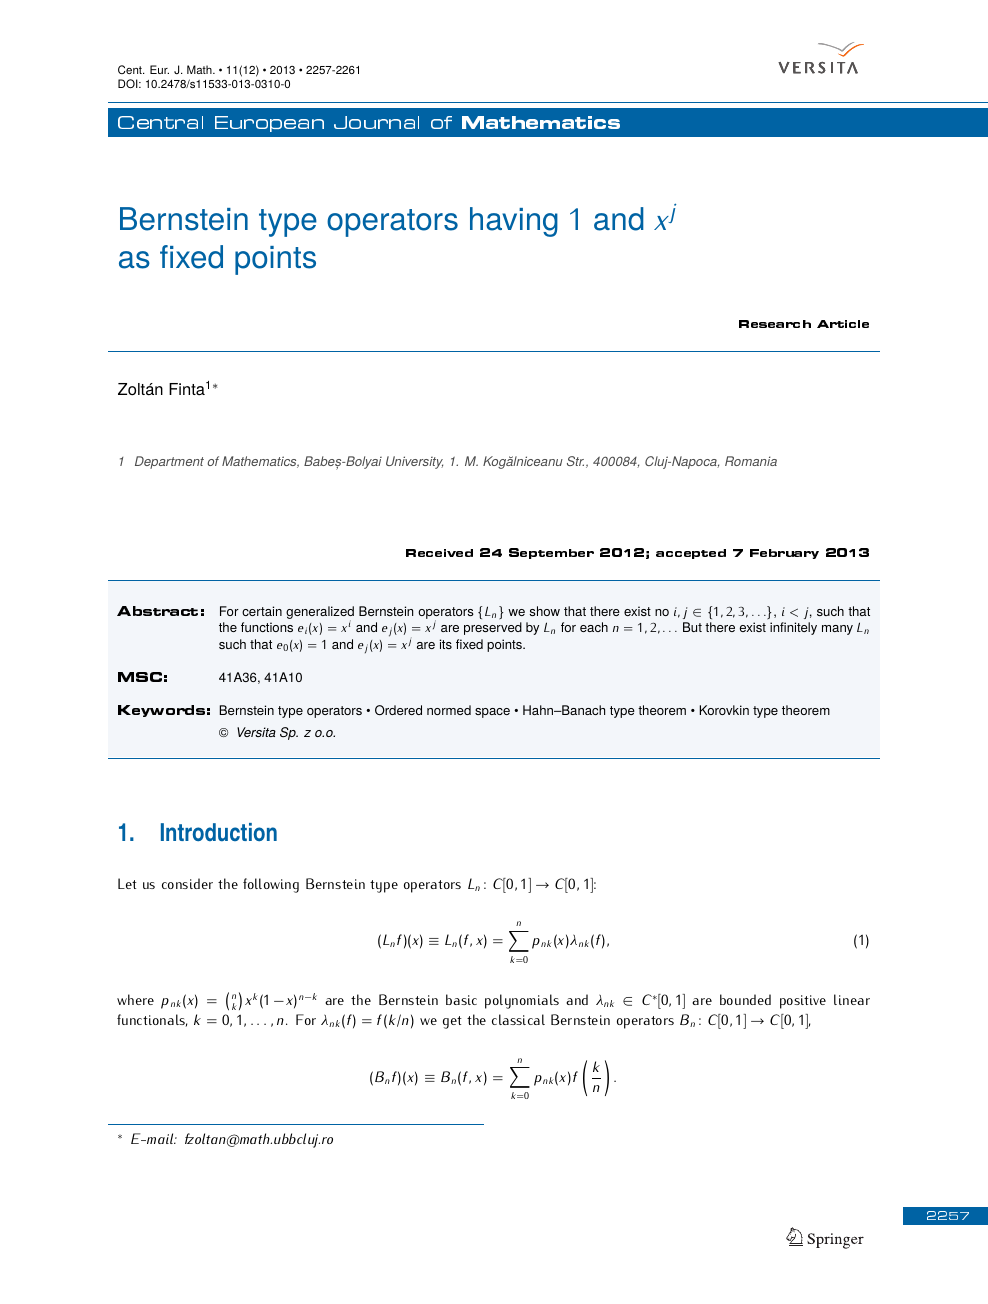 Bernstein Type Operators Having 1 And X J As Fixed Points Topic Of Research Paper In Mathematics Download Scholarly Article Pdf And Read For Free On Cyberleninka Open Science Hub